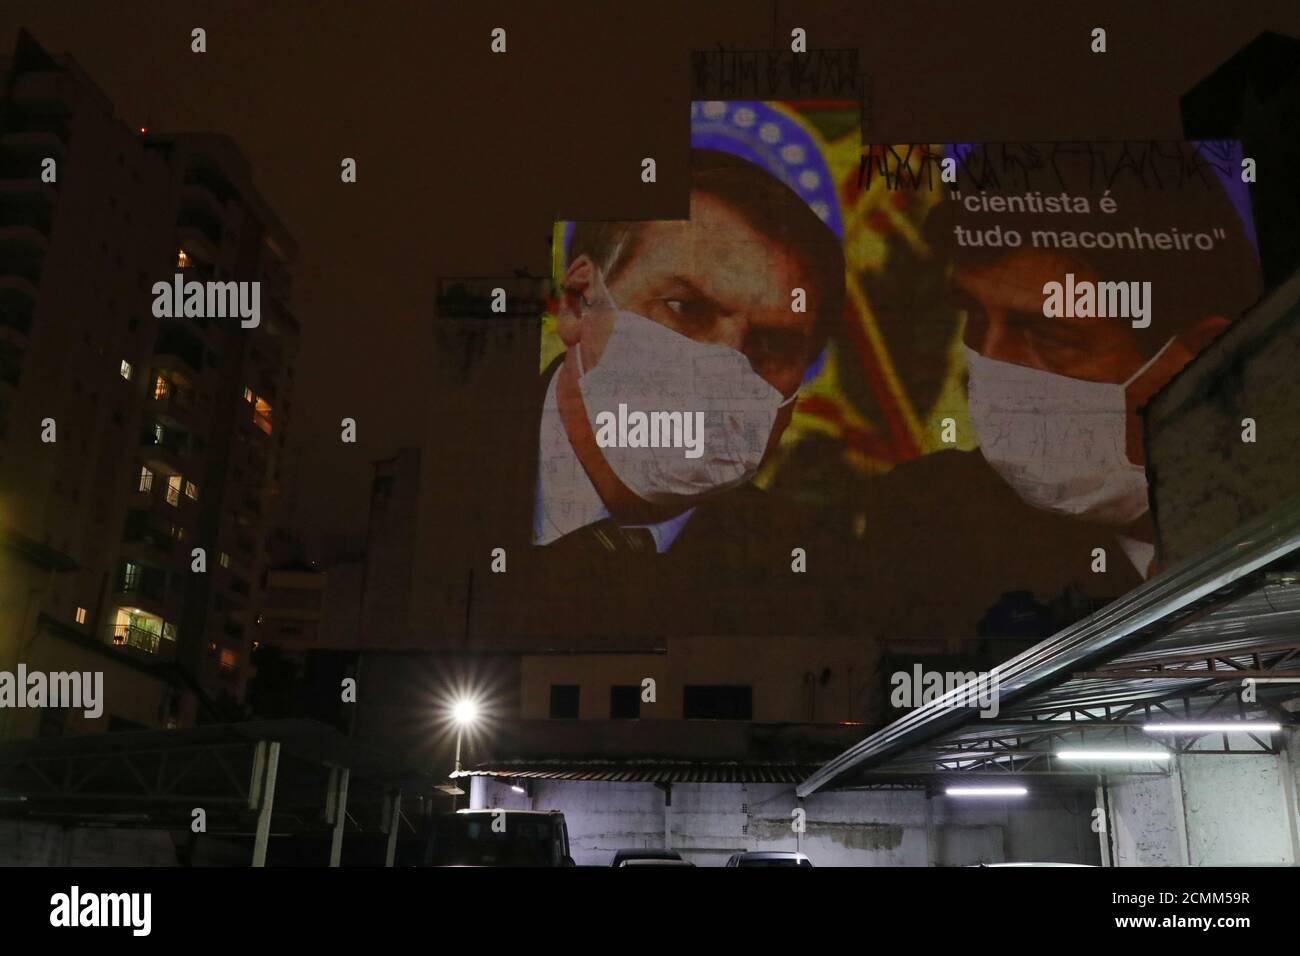 An image depicting Brazil's President Jair Bolsonaro and Health Minister Luiz Henrique Mandetta wearing protective face masks and the phrase “Scientists are all potheads” is projected on the wall of a building as a protest, following the coronavirus disease (COVID-19) outbreak in Sao Paulo, Brazil, March 19, 2020. REUTERS/Amanda Perobelli Stock Photo